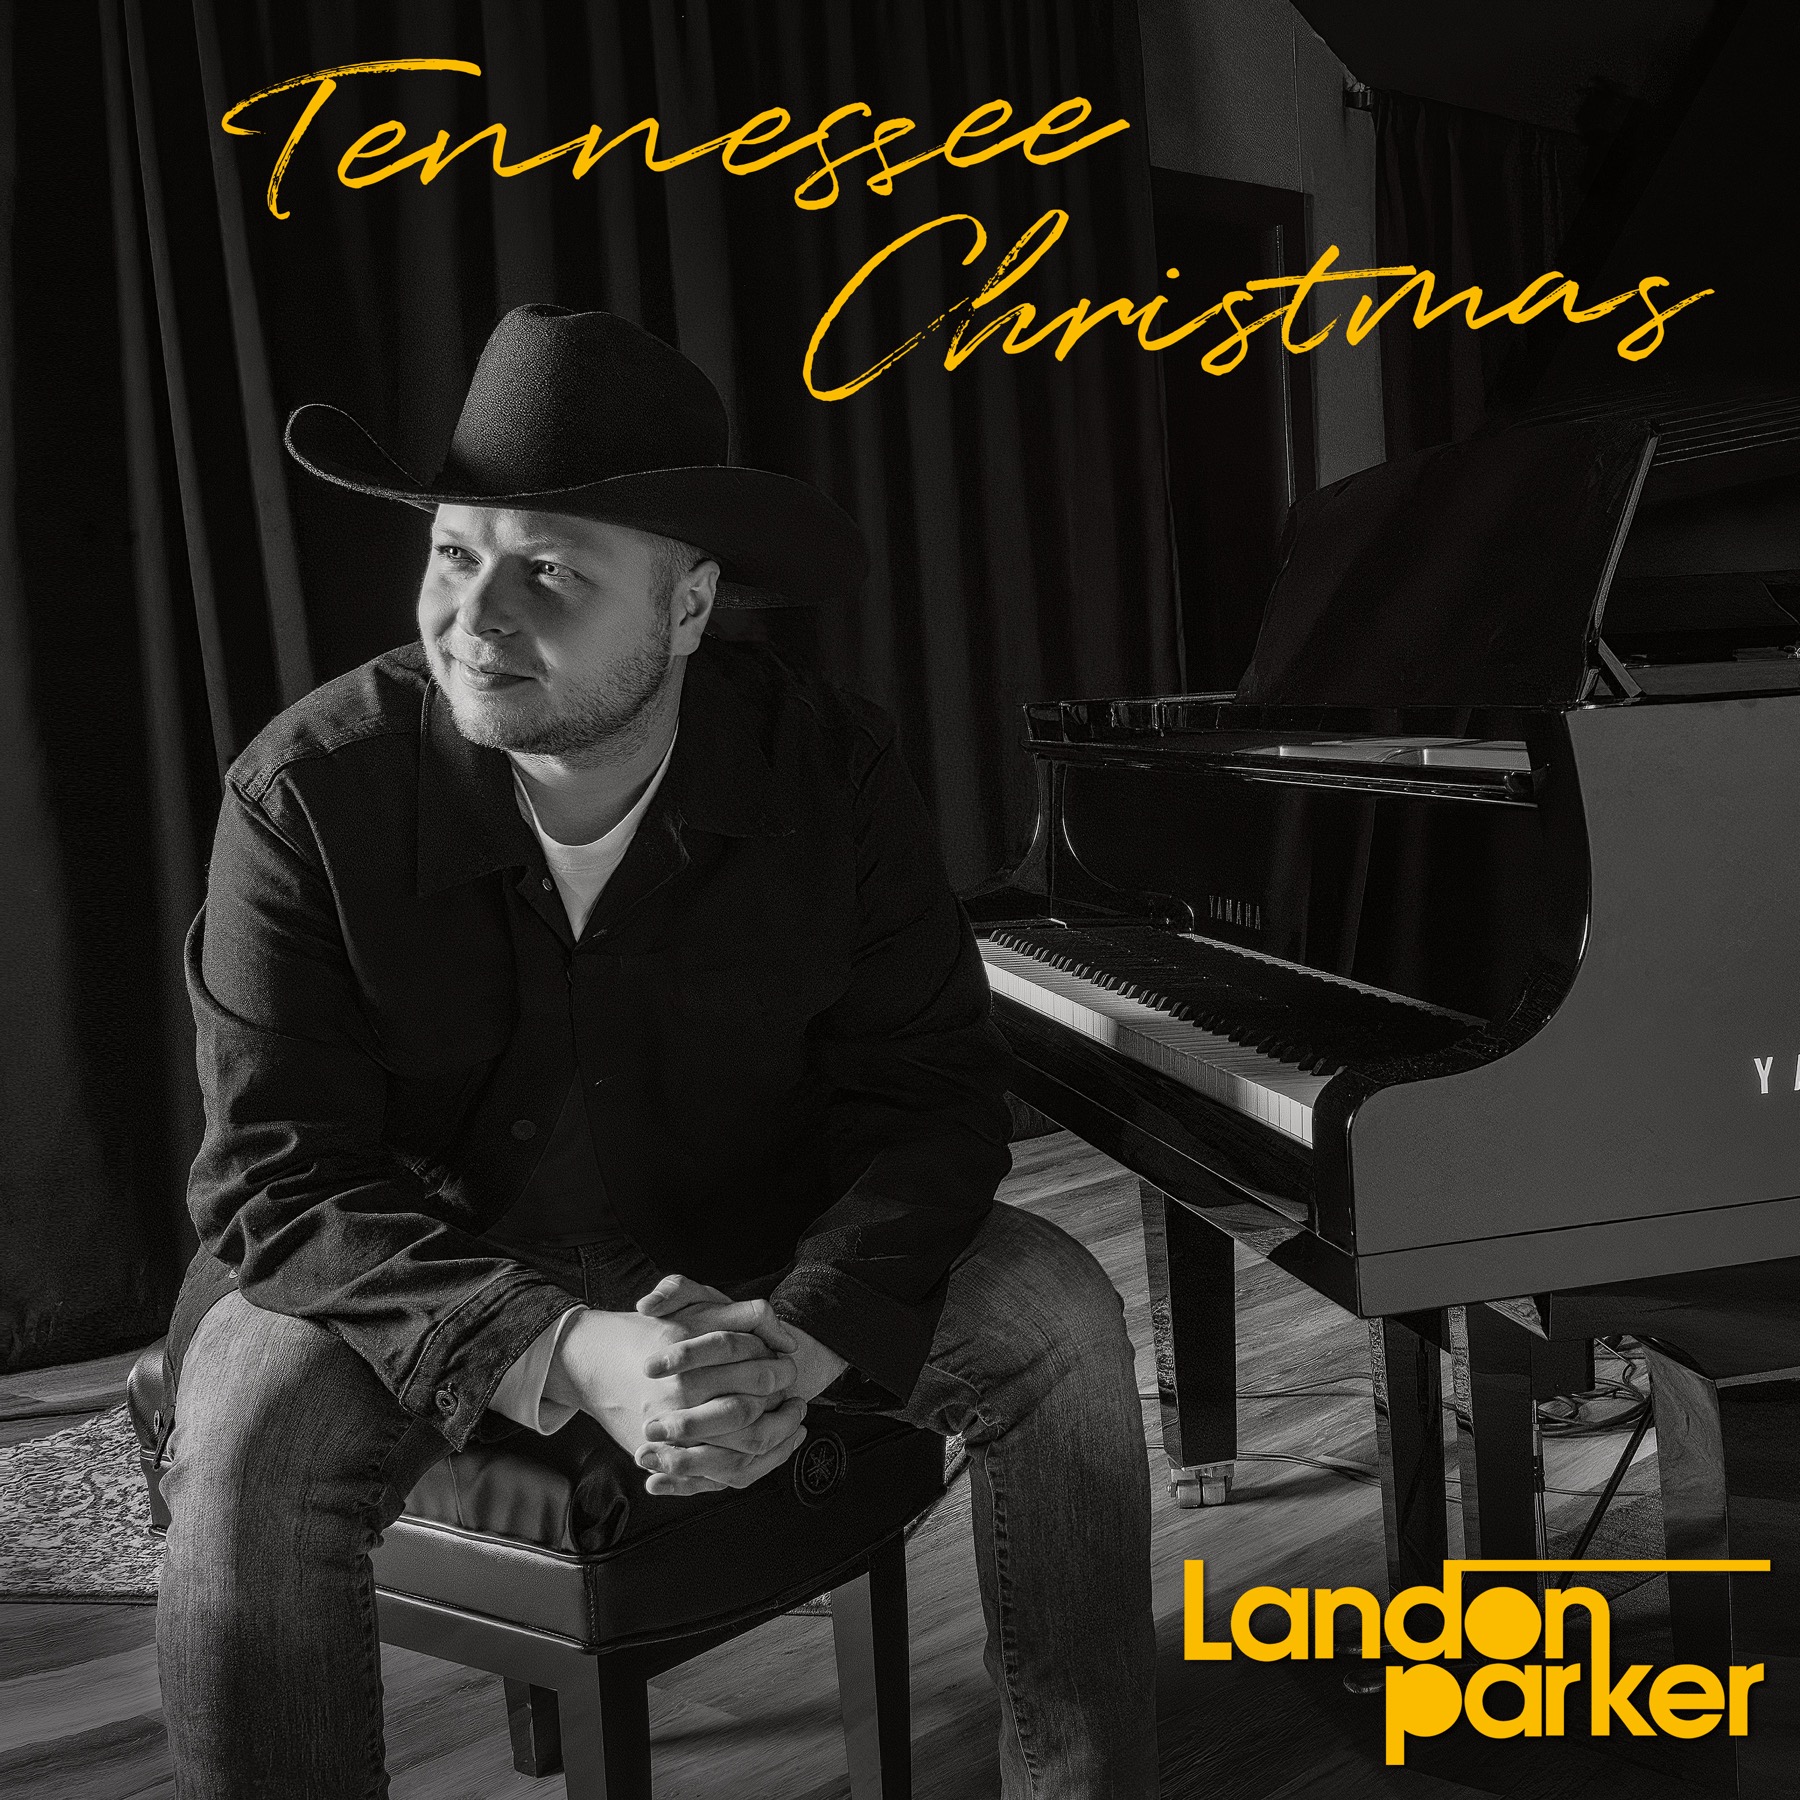 Tennessee Christmas Cover Art featuring Landon Parker sitting in the recording studio by a piano